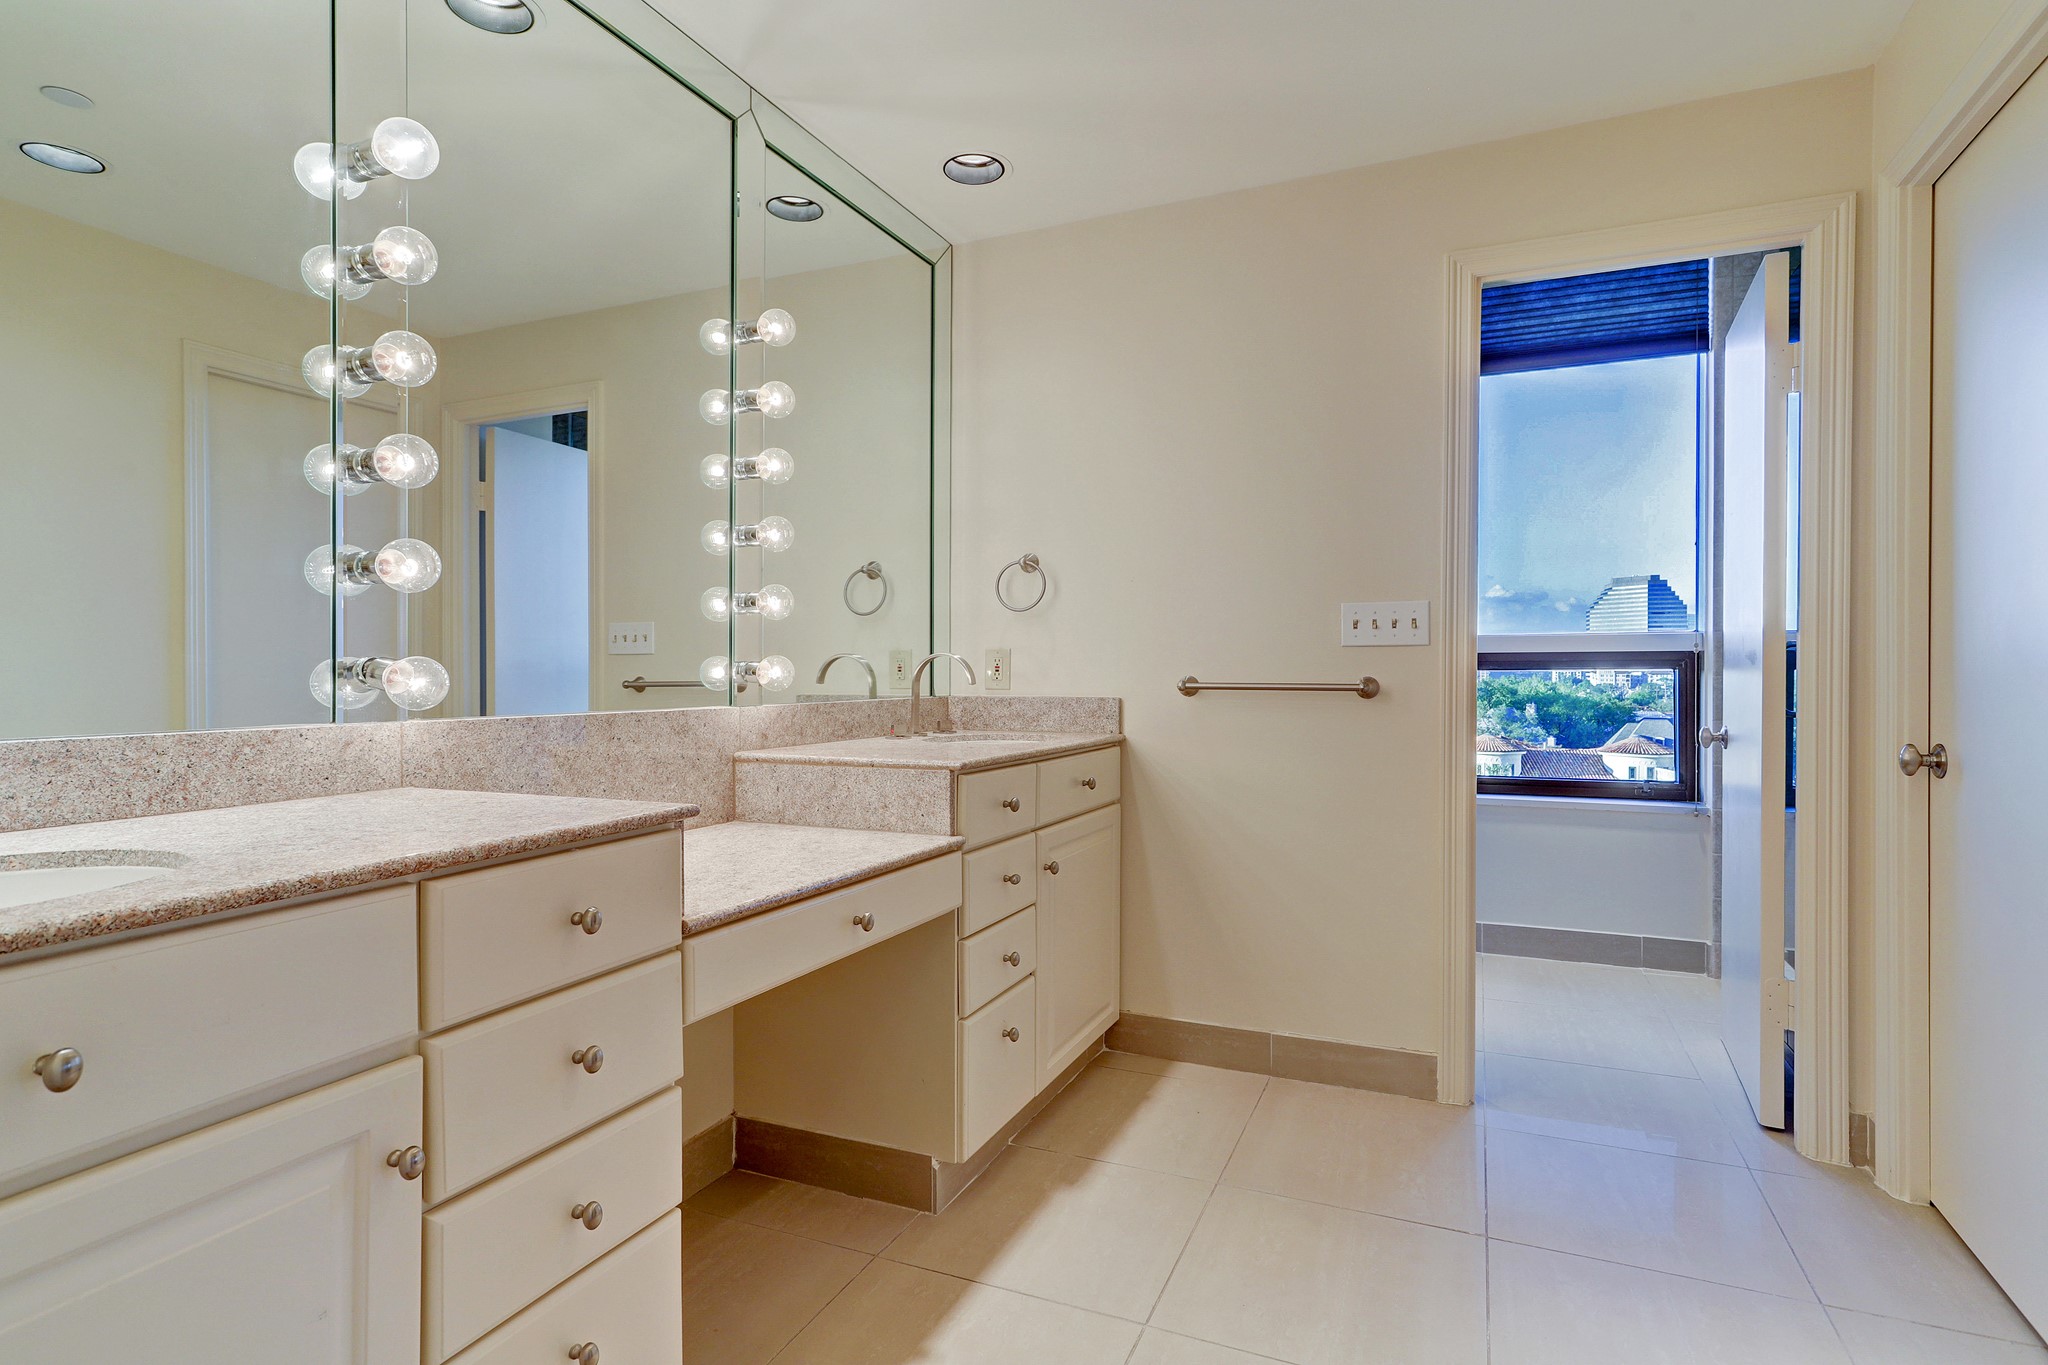 Remodeled bathroom with double sinks and vanity. The open door leads to a separate shower and tub and the closed door on the right is a private water closet.